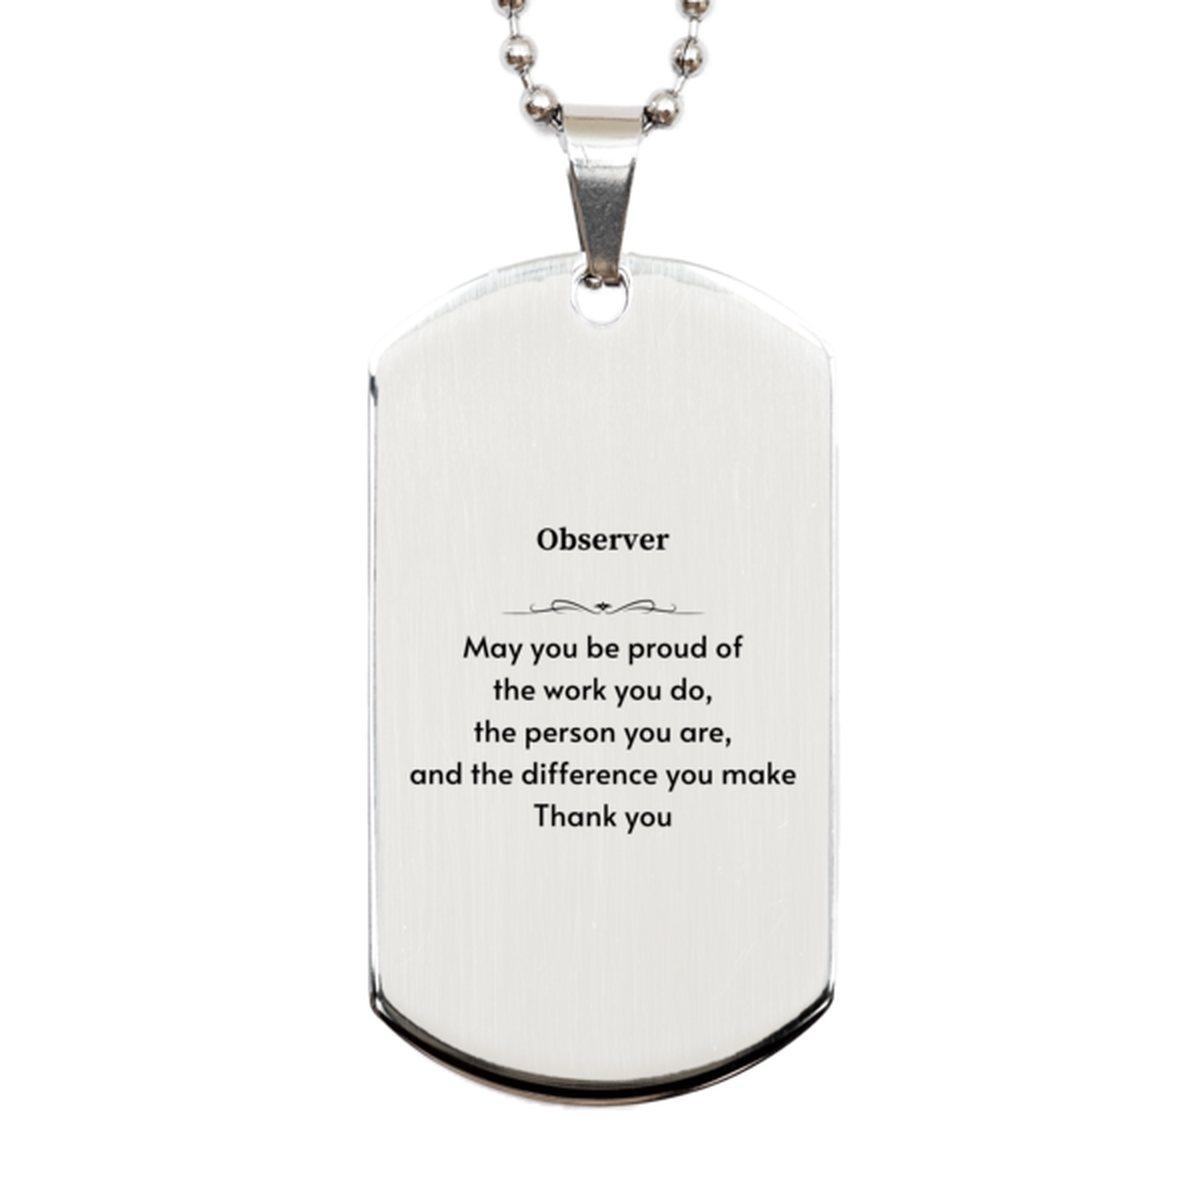 Heartwarming Silver Dog Tag Retirement Coworkers Gifts for Observer, Observer May You be proud of the work you do, the person you are Gifts for Boss Men Women Friends